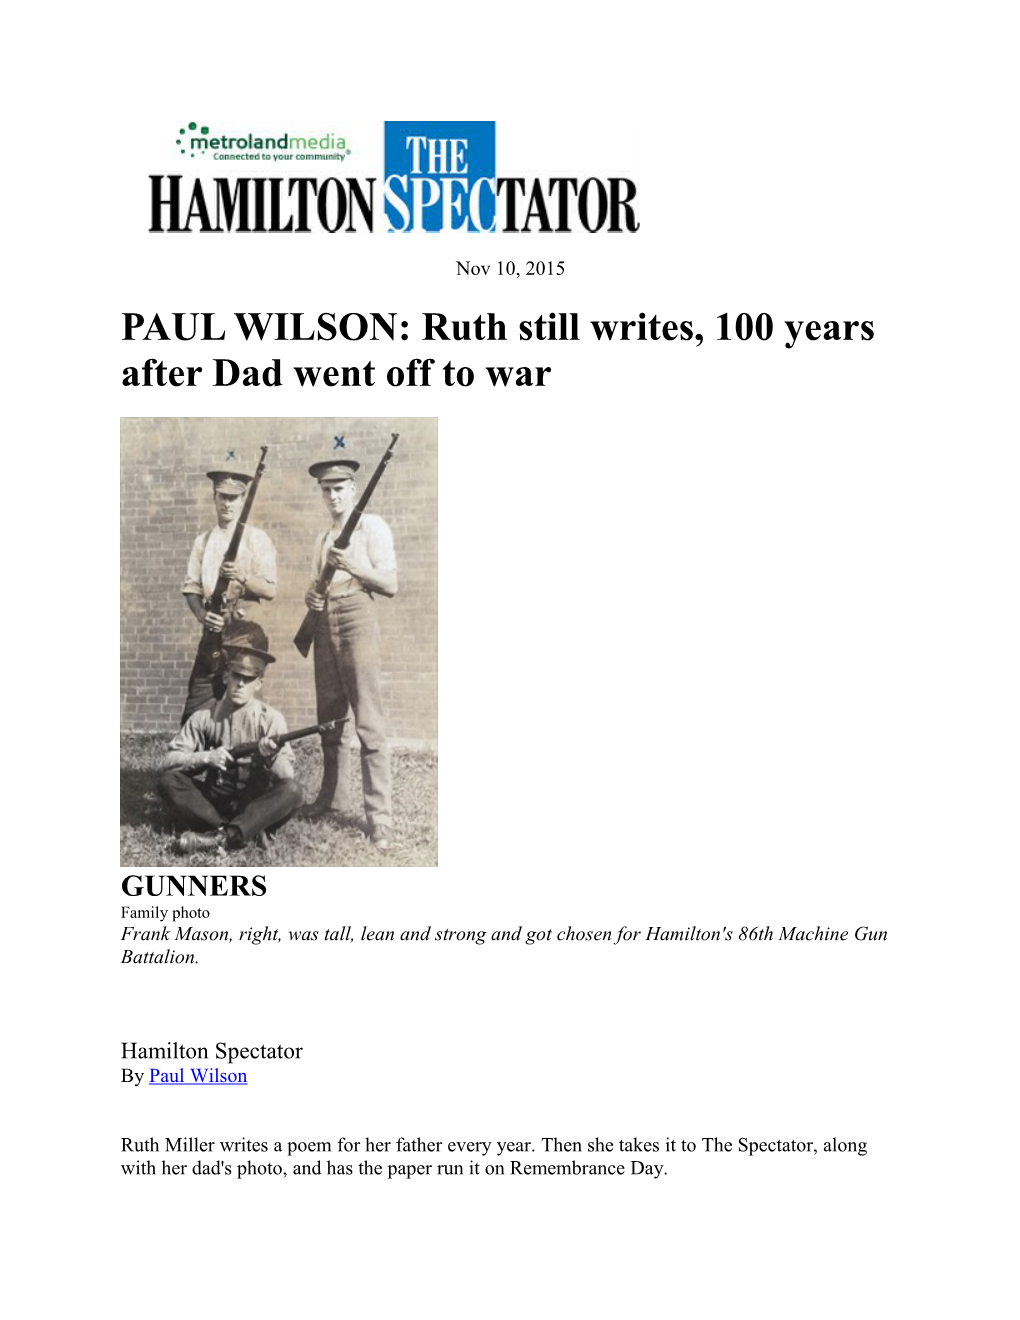 PAUL WILSON: Ruth Still Writes, 100 Years After Dad Went Off to War